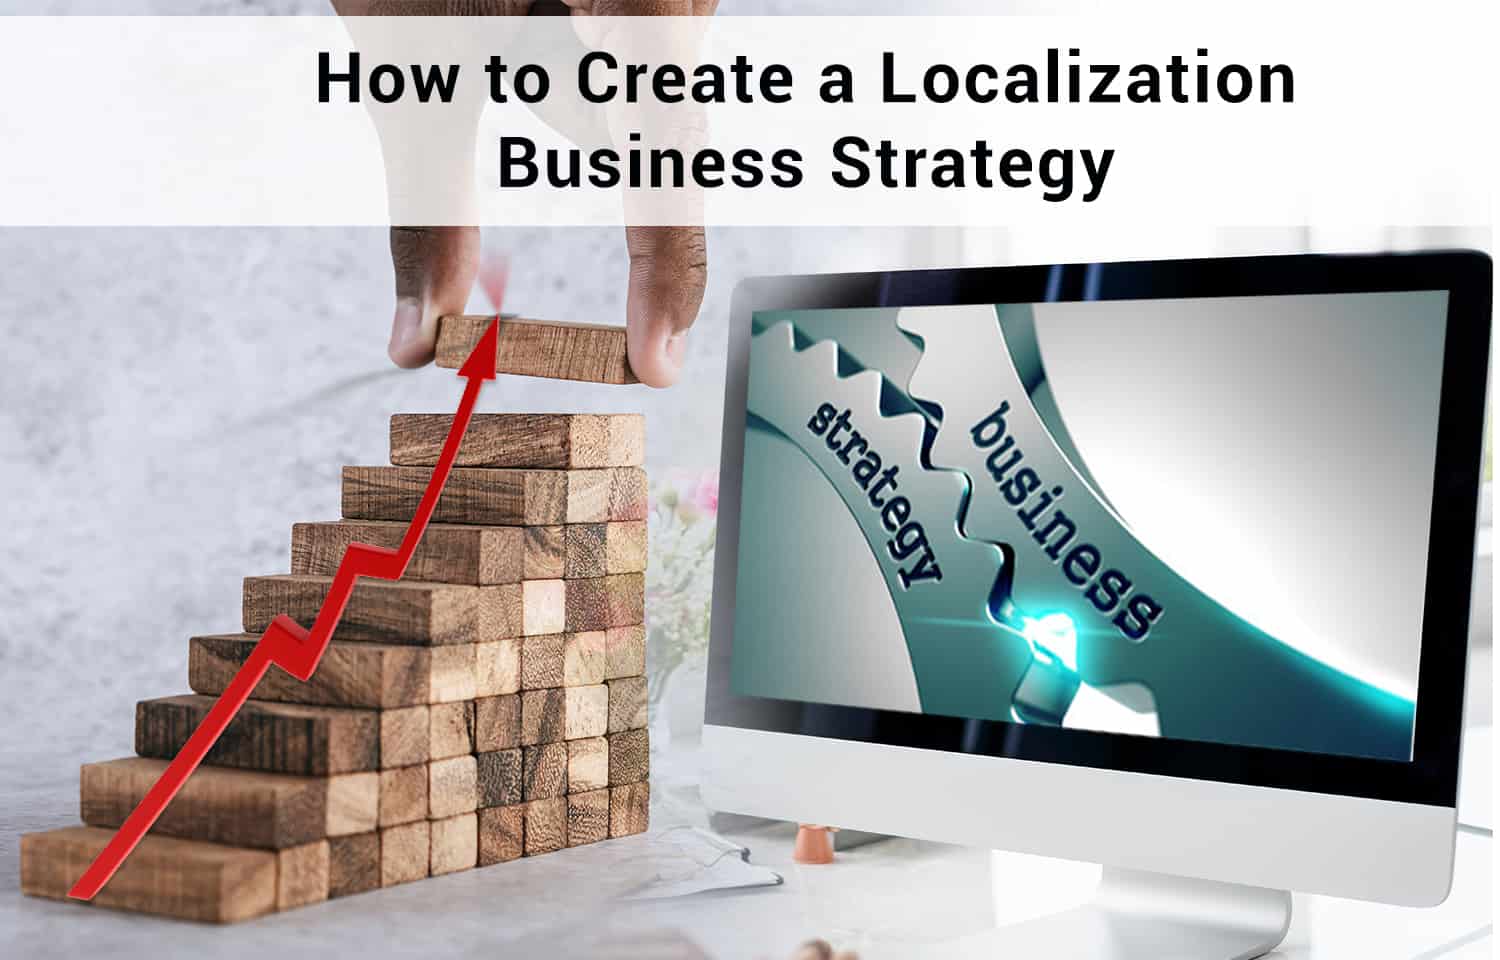 How to Create a Localization Business Strategy: 8 Steps to Follow